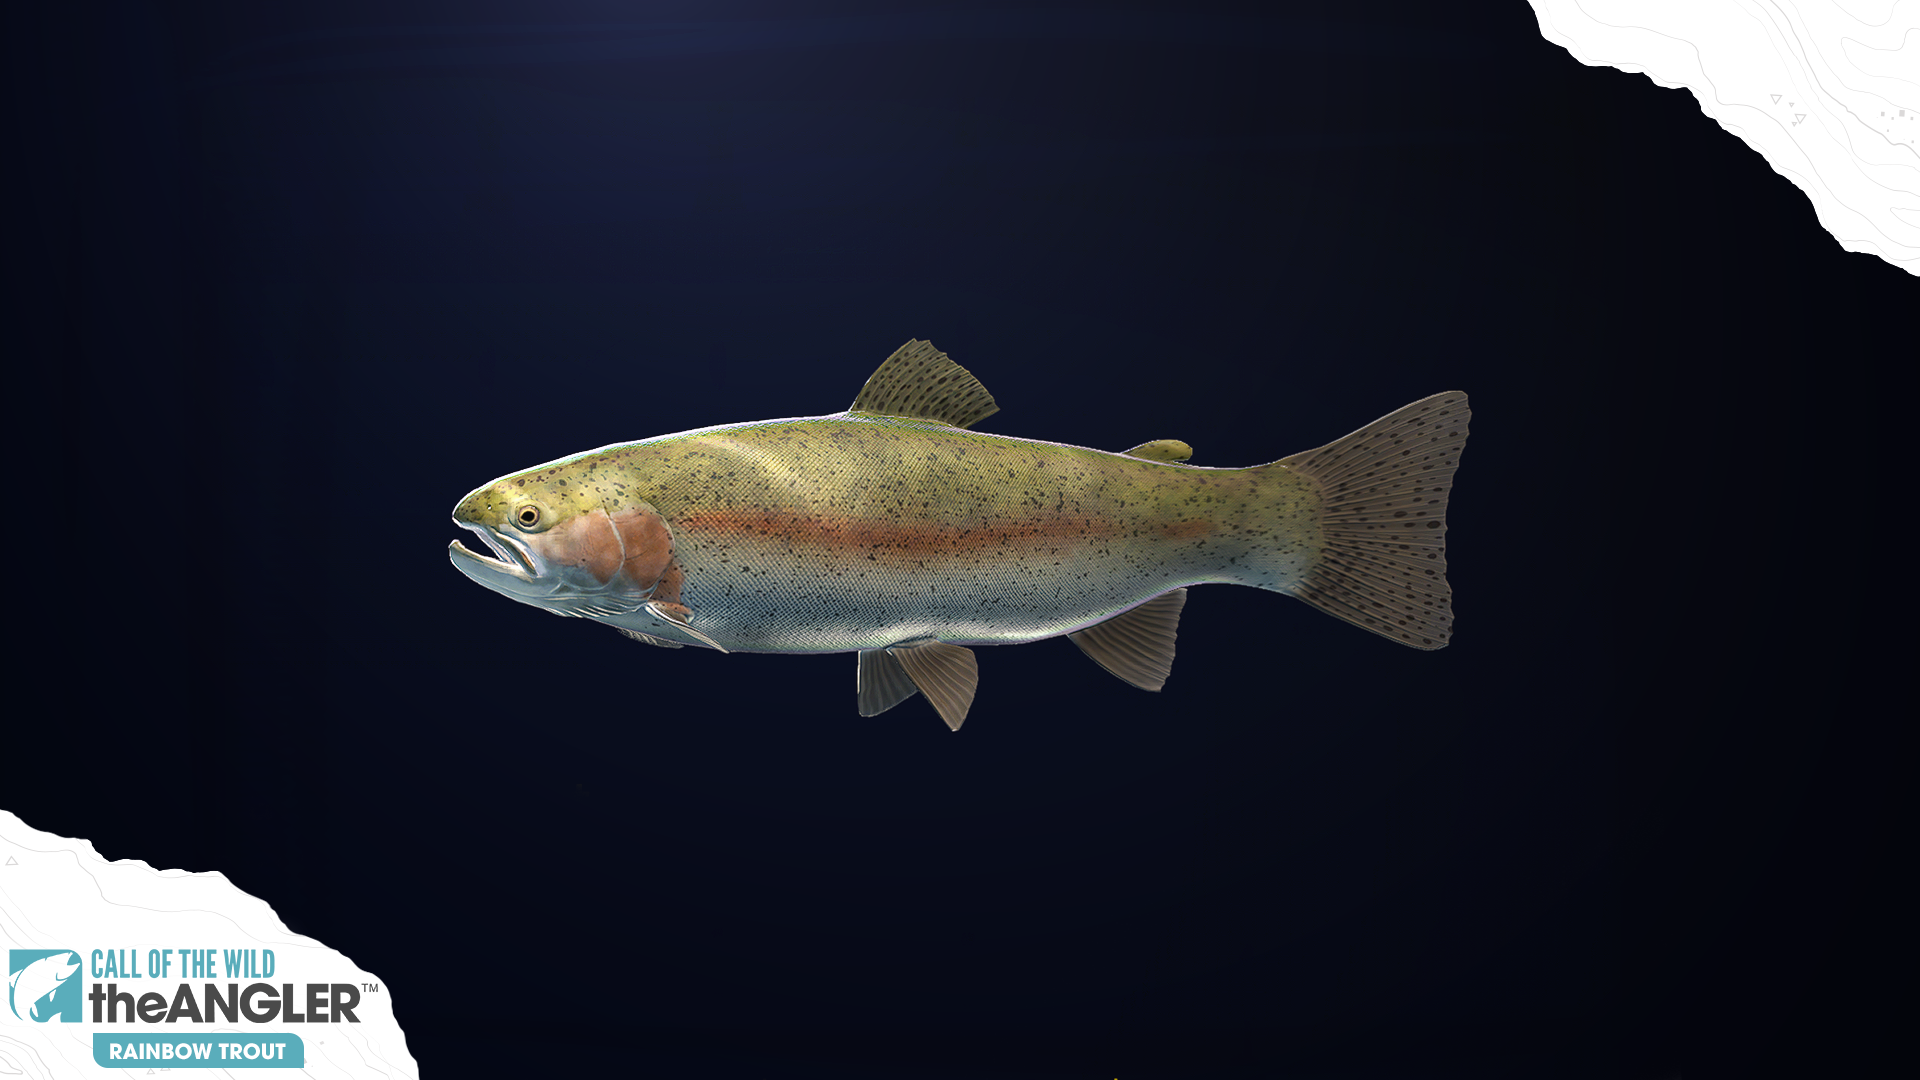 An image of the fish species, Rainbow Trout.